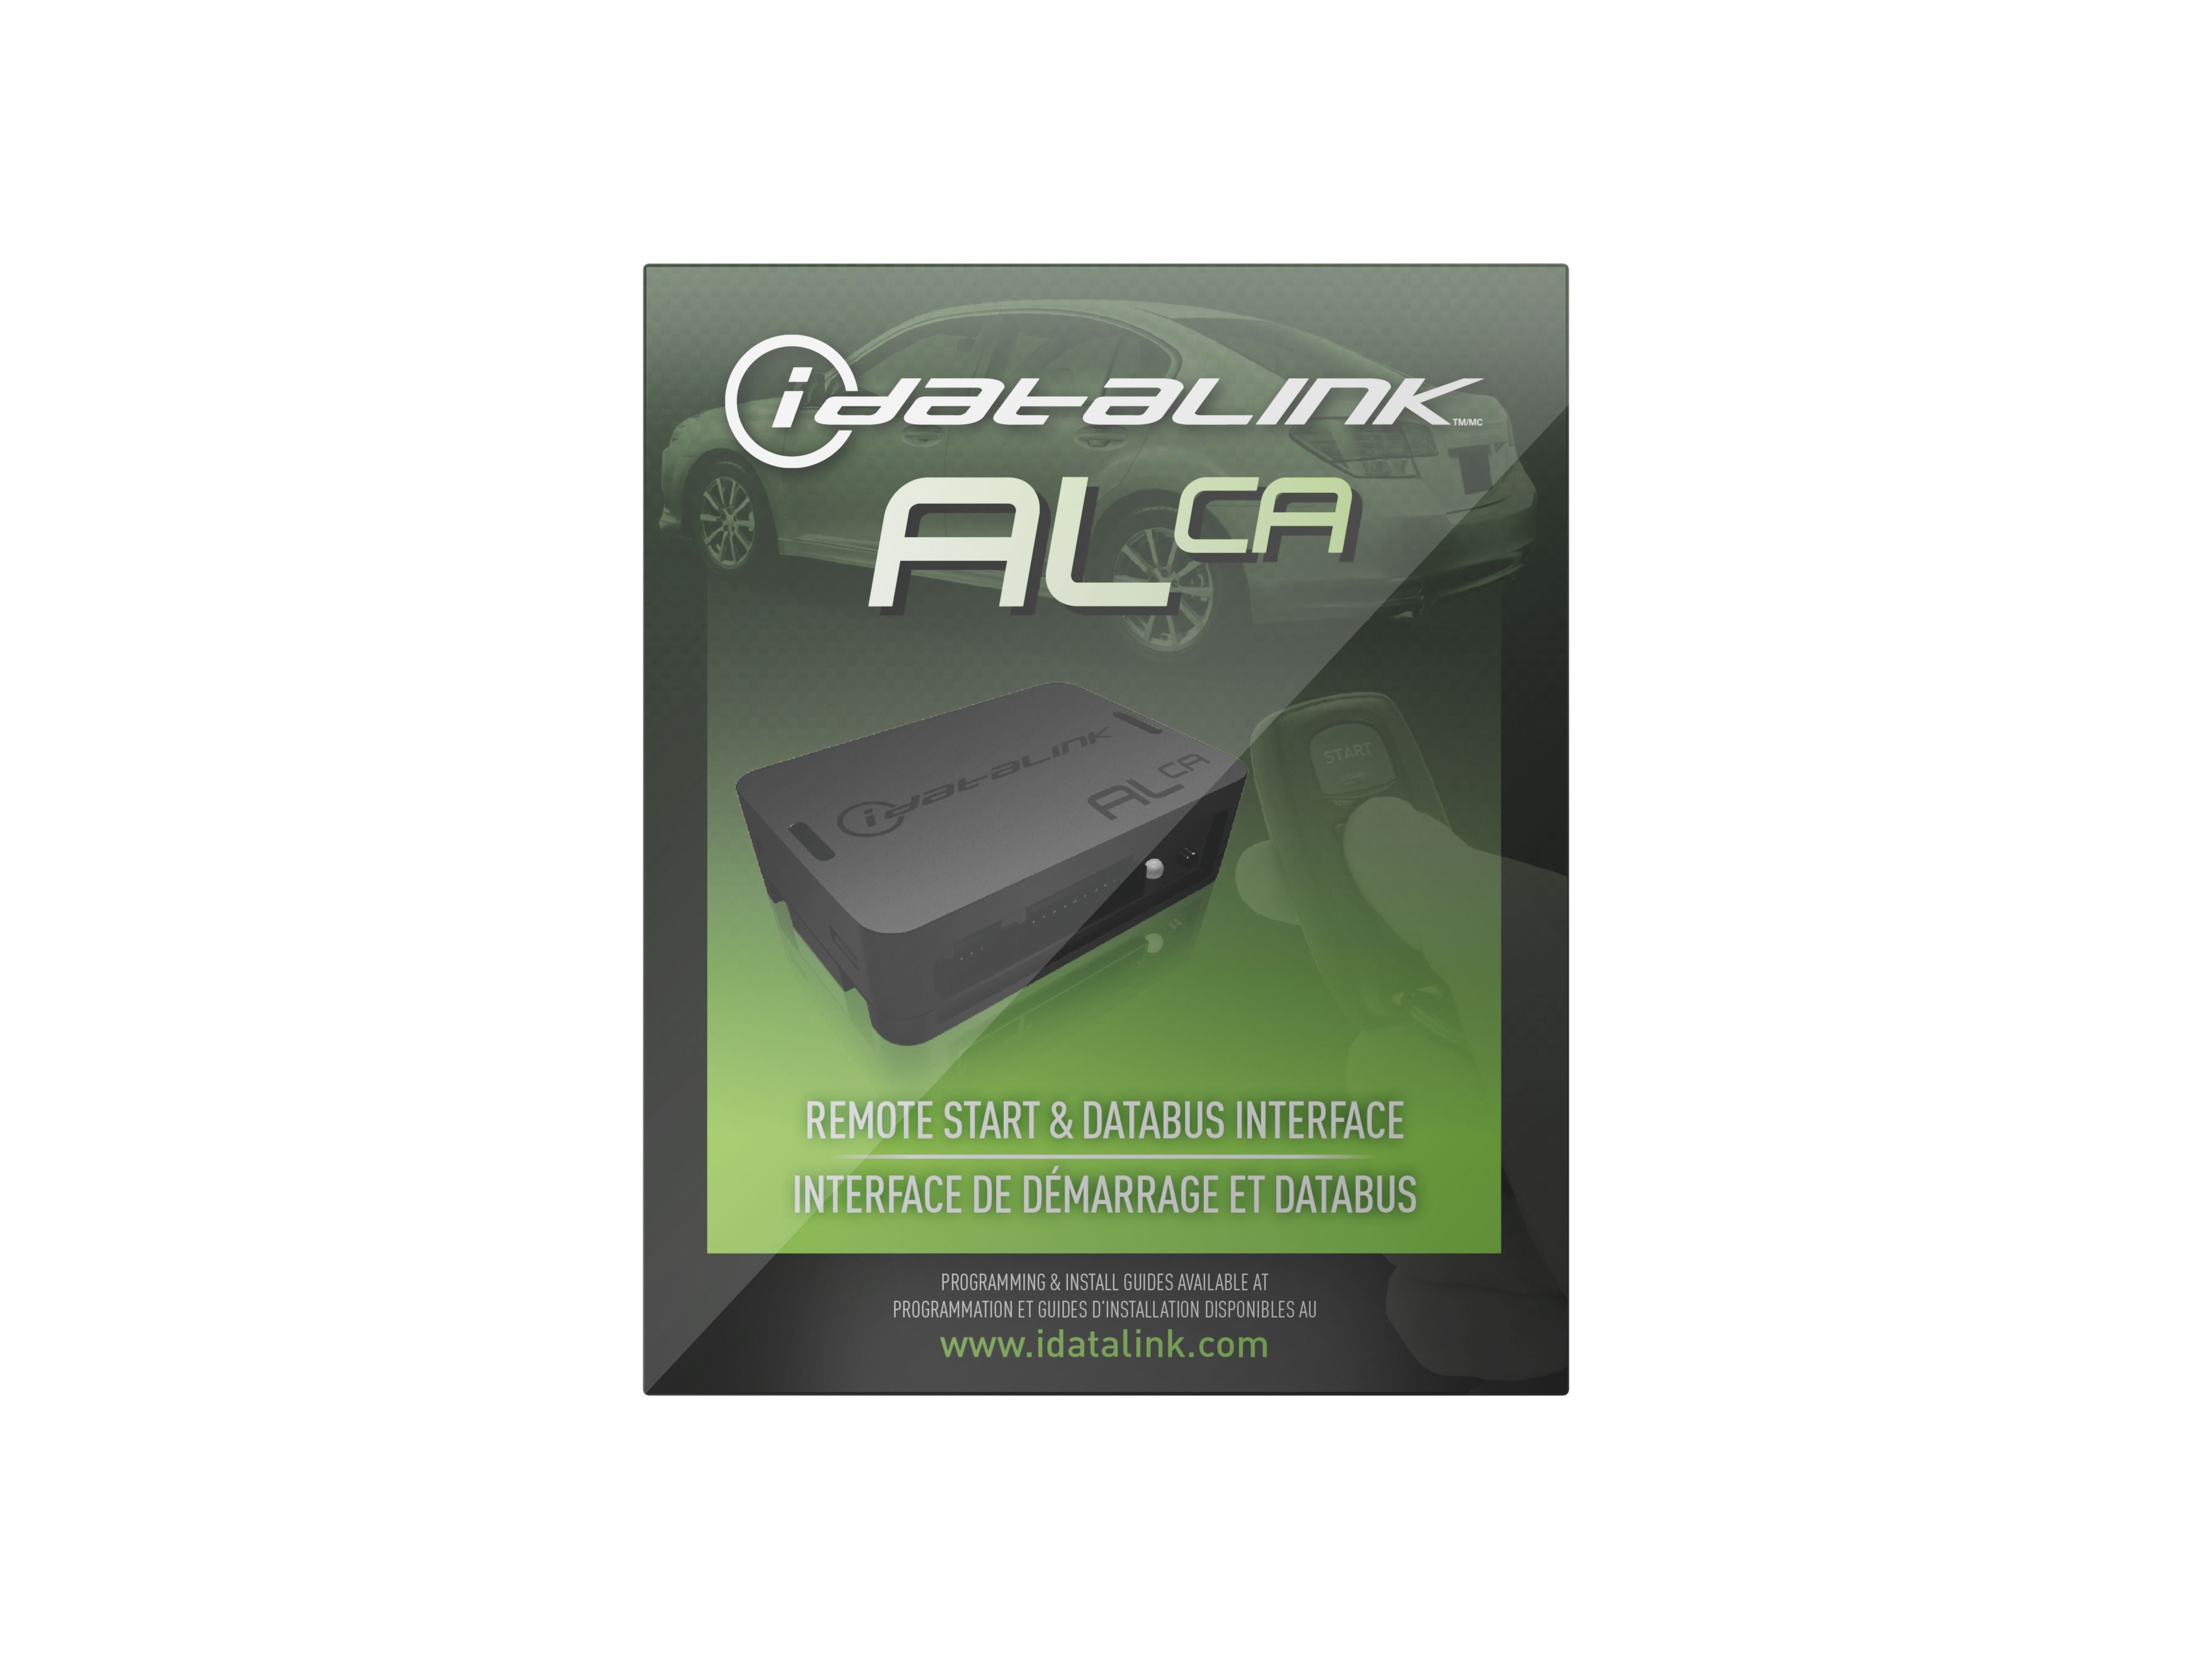 iDatalink ADS-AL CA - All-In-One CAN interface module for over 4000 Vehicules 97 and Up Including Exclusive KLON Firmware Applications